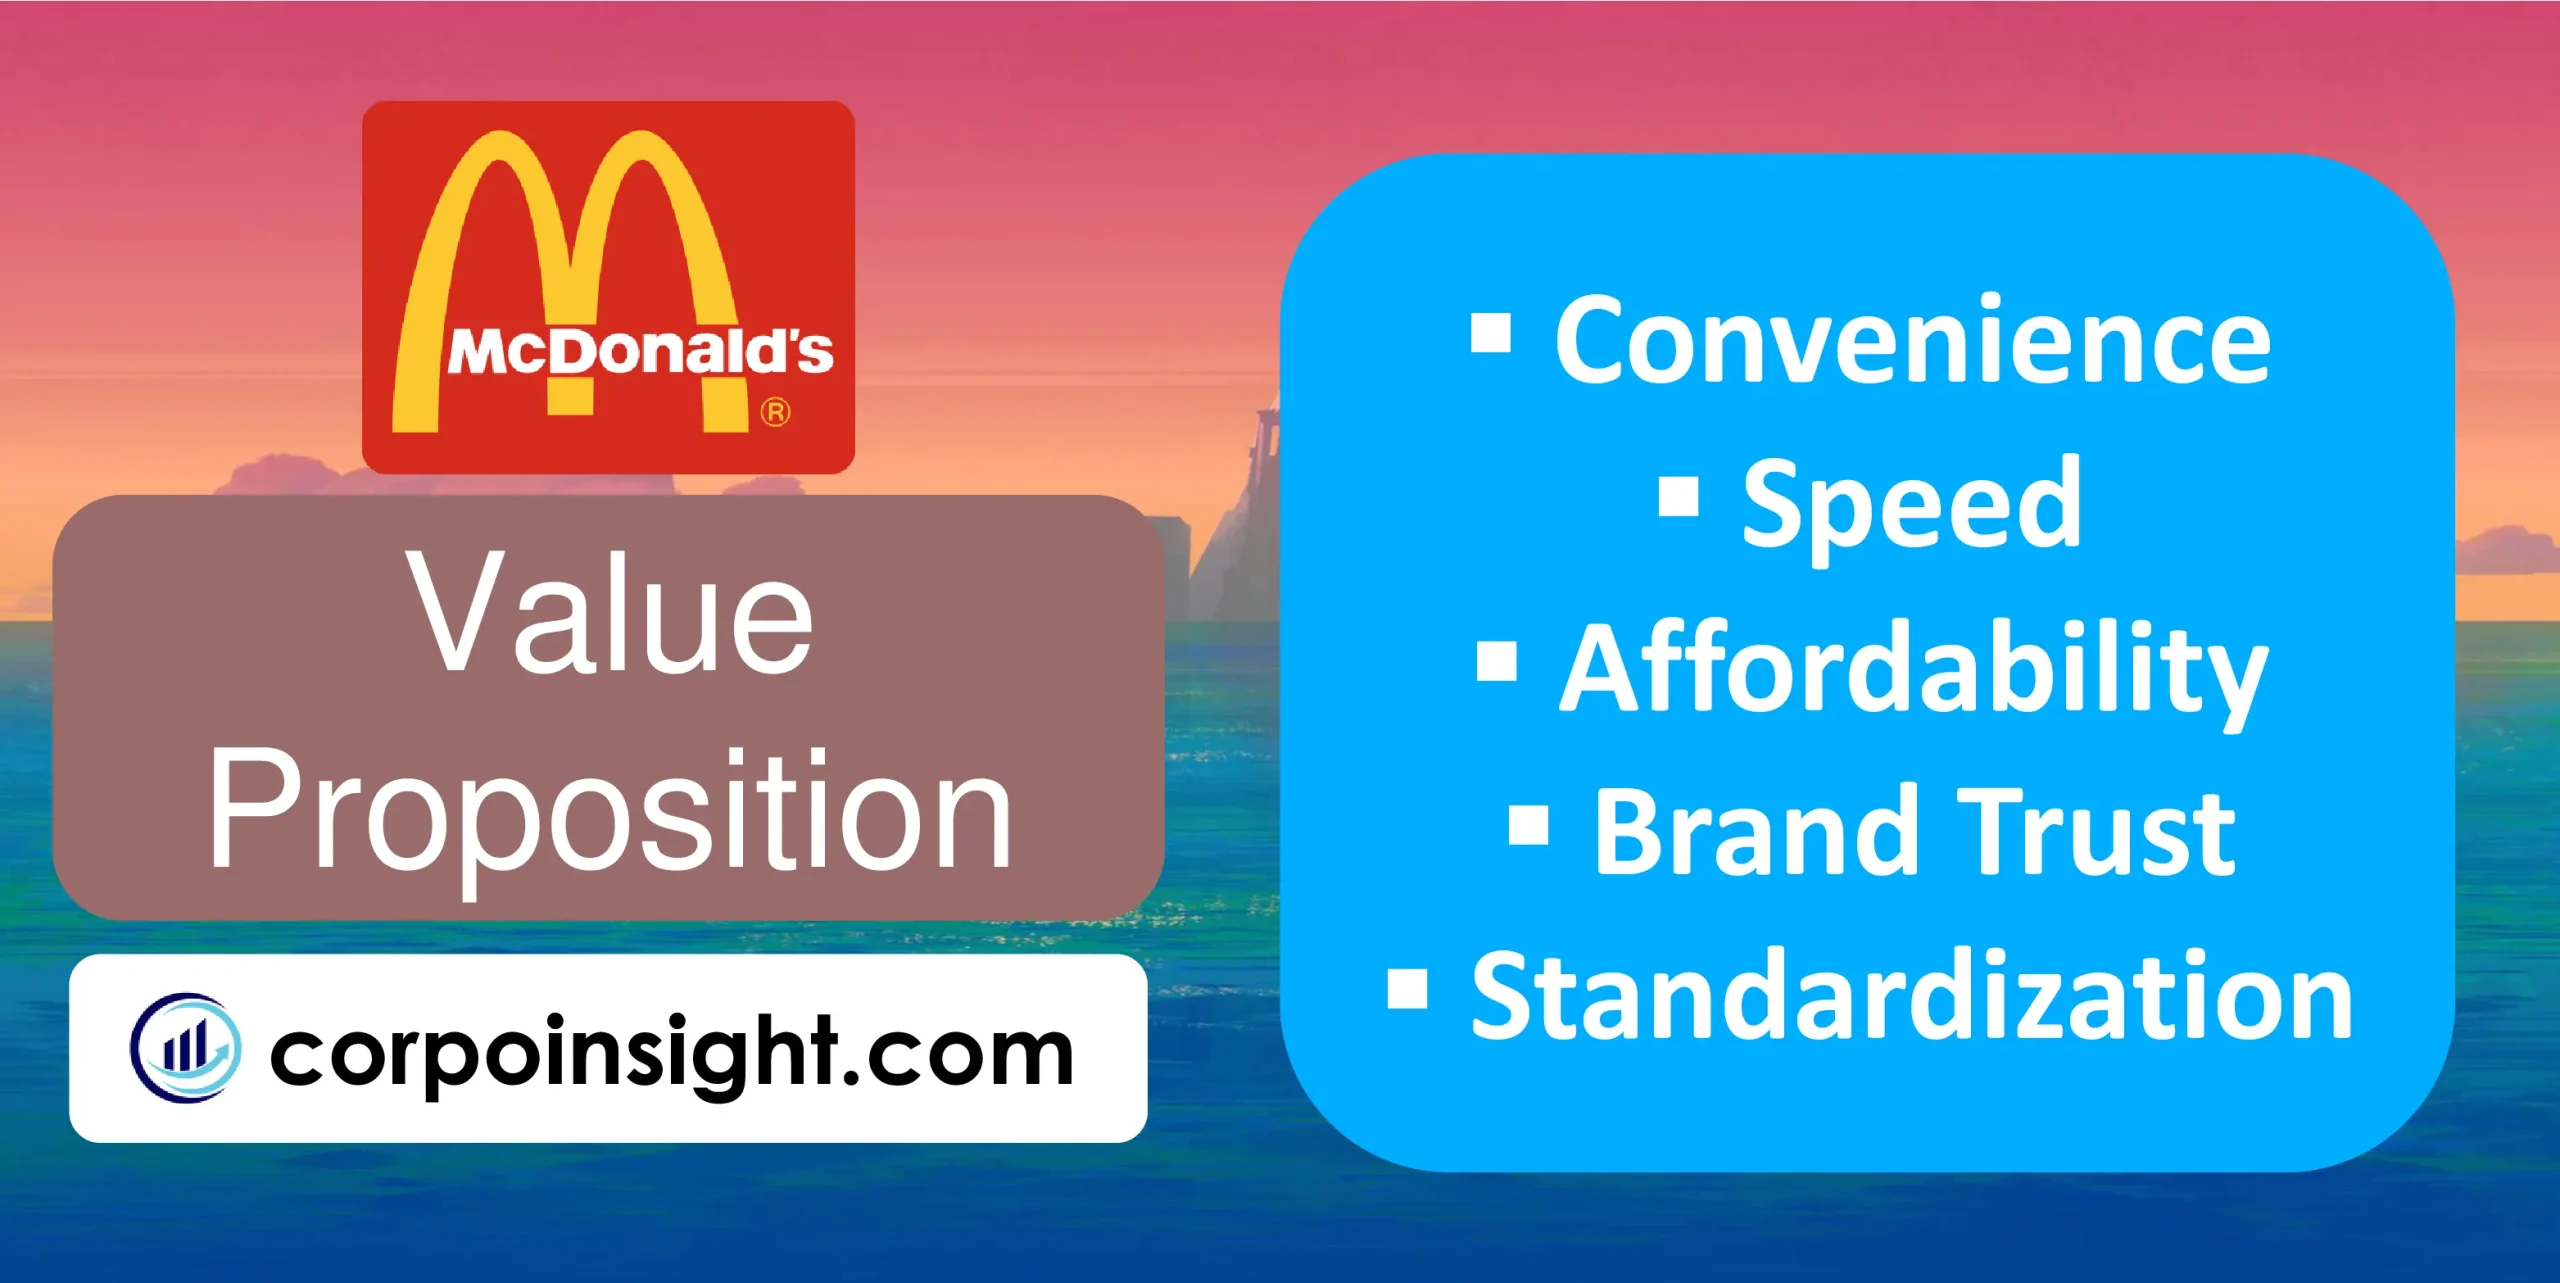 Value Proposition of McDonald's